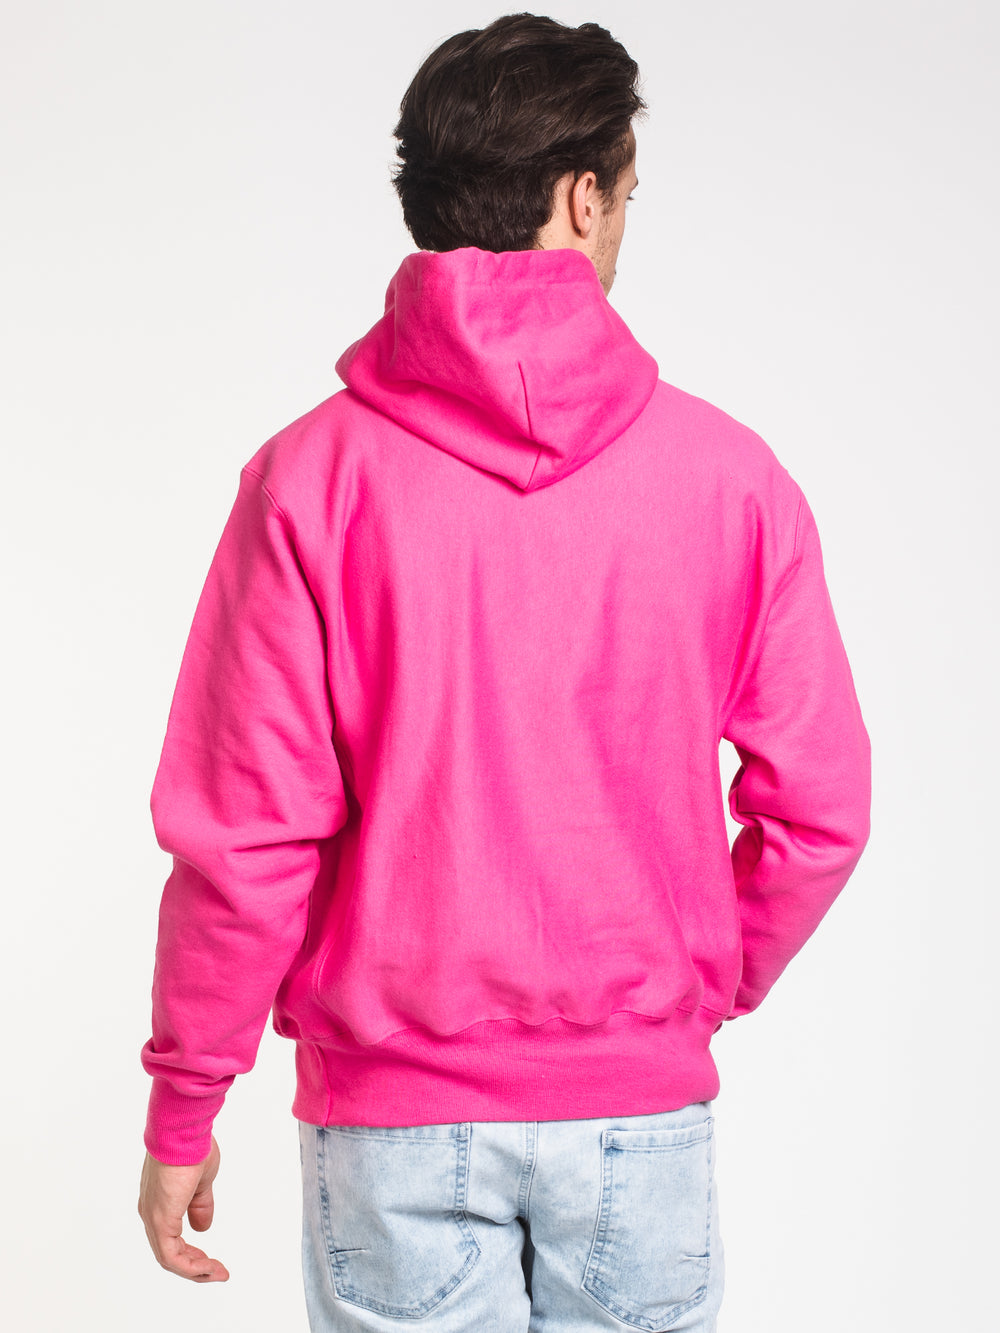 MENS REV WEAVE CHN PULLOVER HOODIE - PINK - CLEARANCE